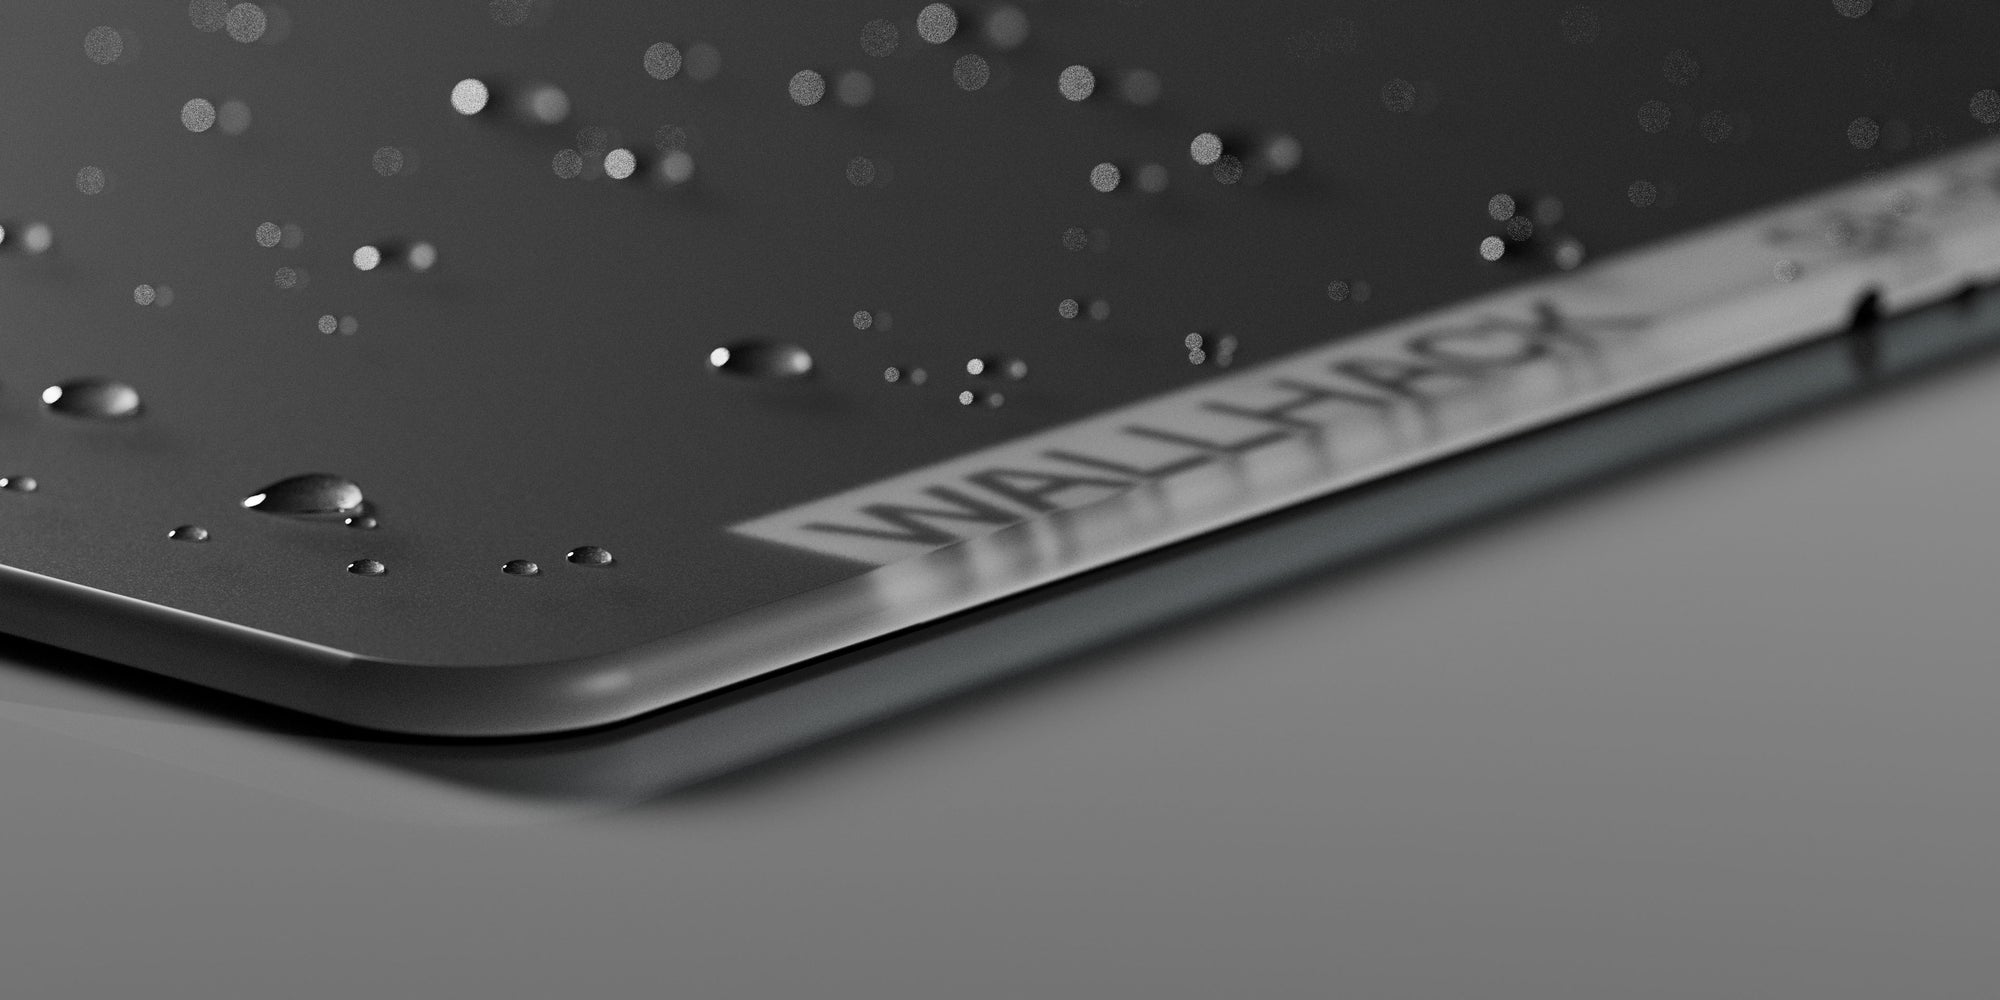 A close up of the Wallhack glass mouse pad with water droplets to showcase water resistance